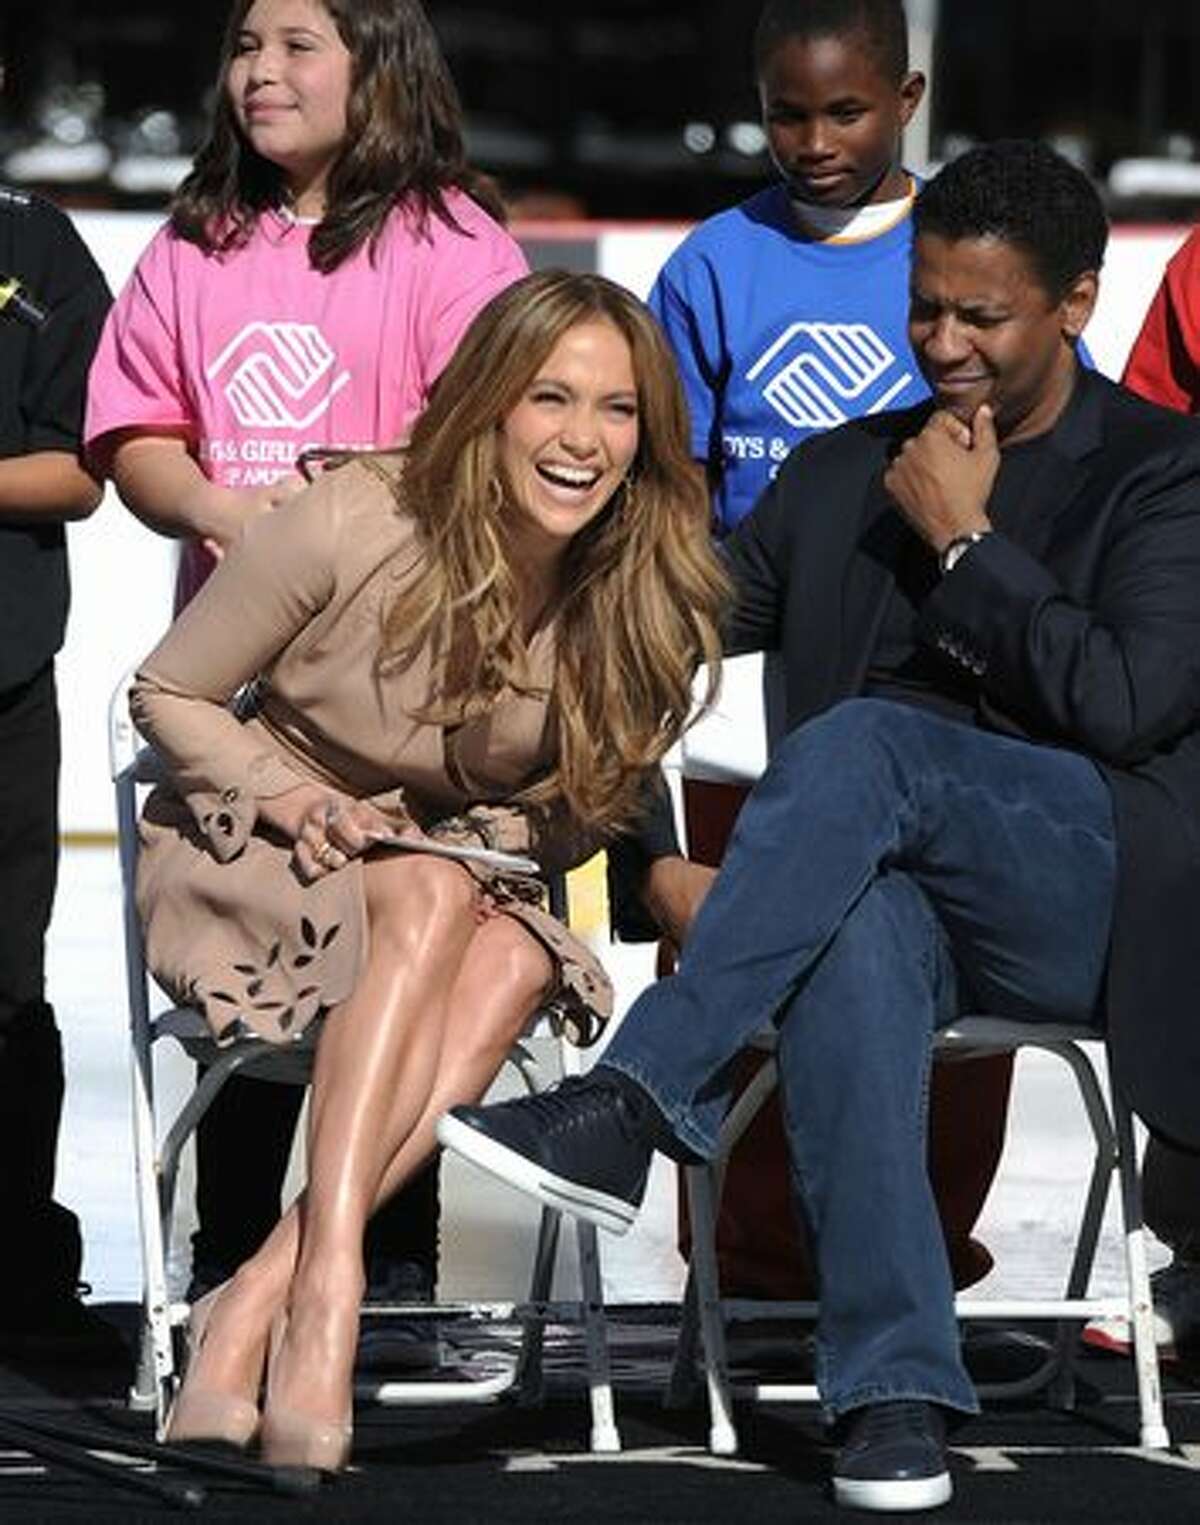 Actress Jennifer Lopez and actor Denzel Washington are photographed as Denzel Washington announces Jennifer Lopez as a national spokesperson for The Boys & Girls Club Of America in Los Angeles, California.